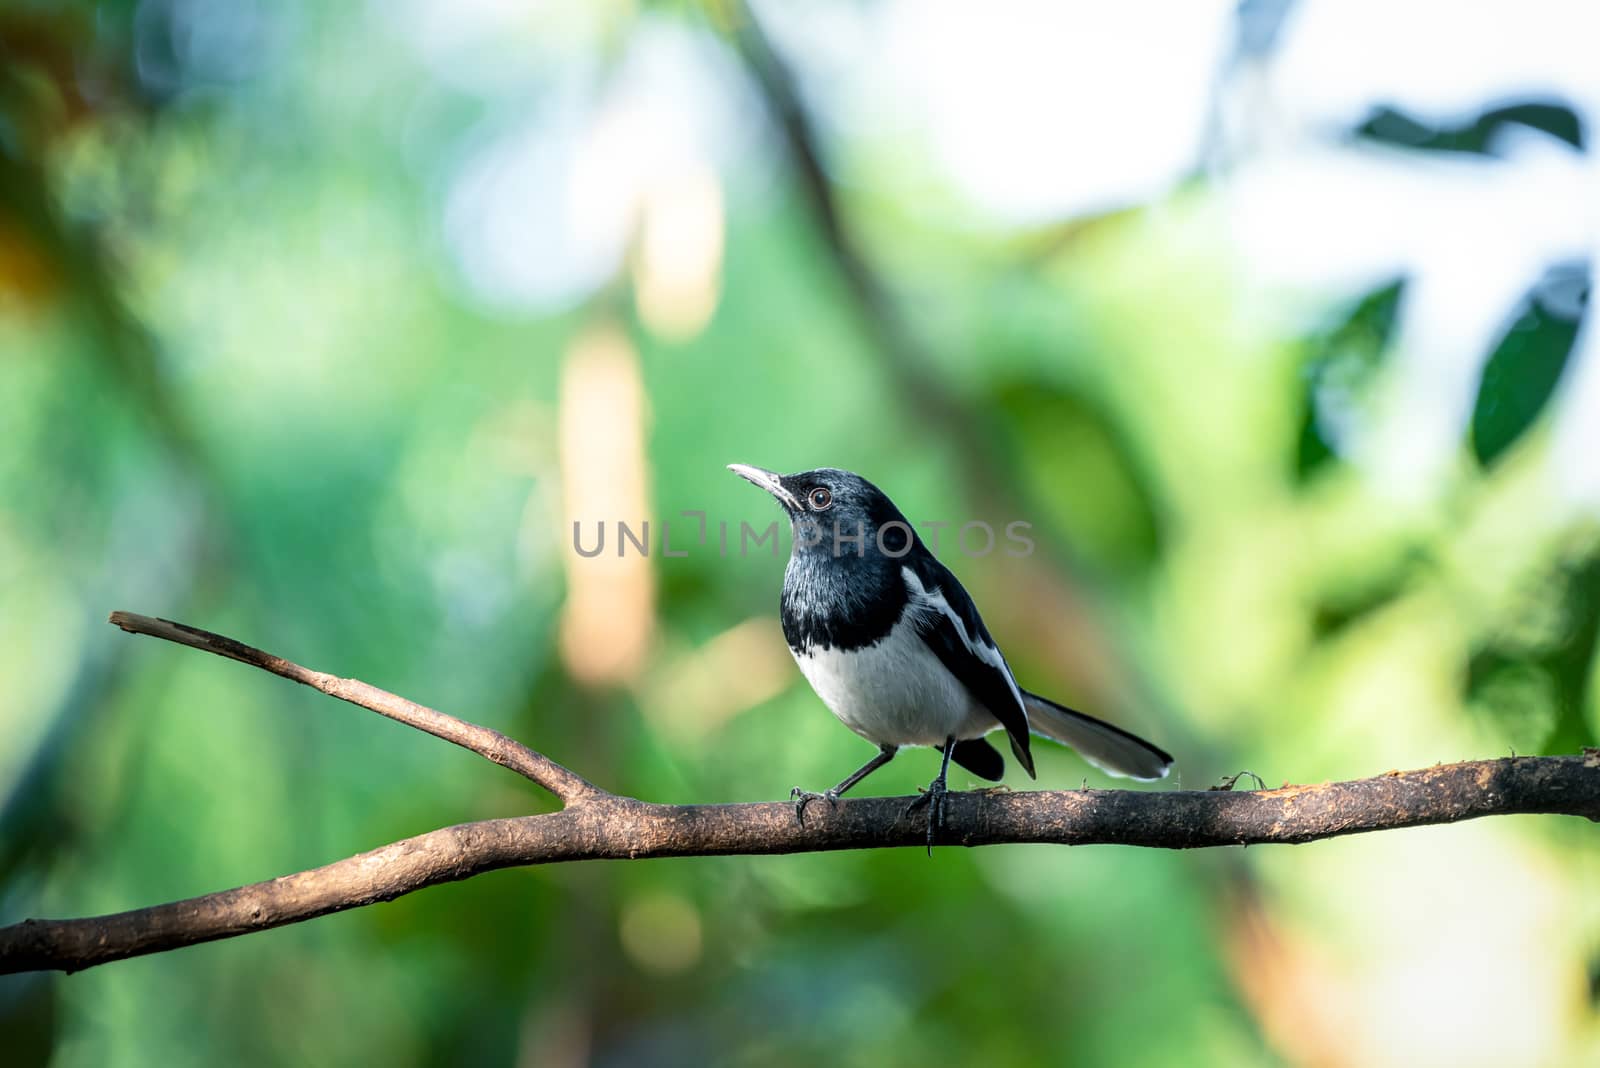 Bird (Oriental magpie-robin or Copsychus saularis) male black and white color perched on a tree in a nature wild